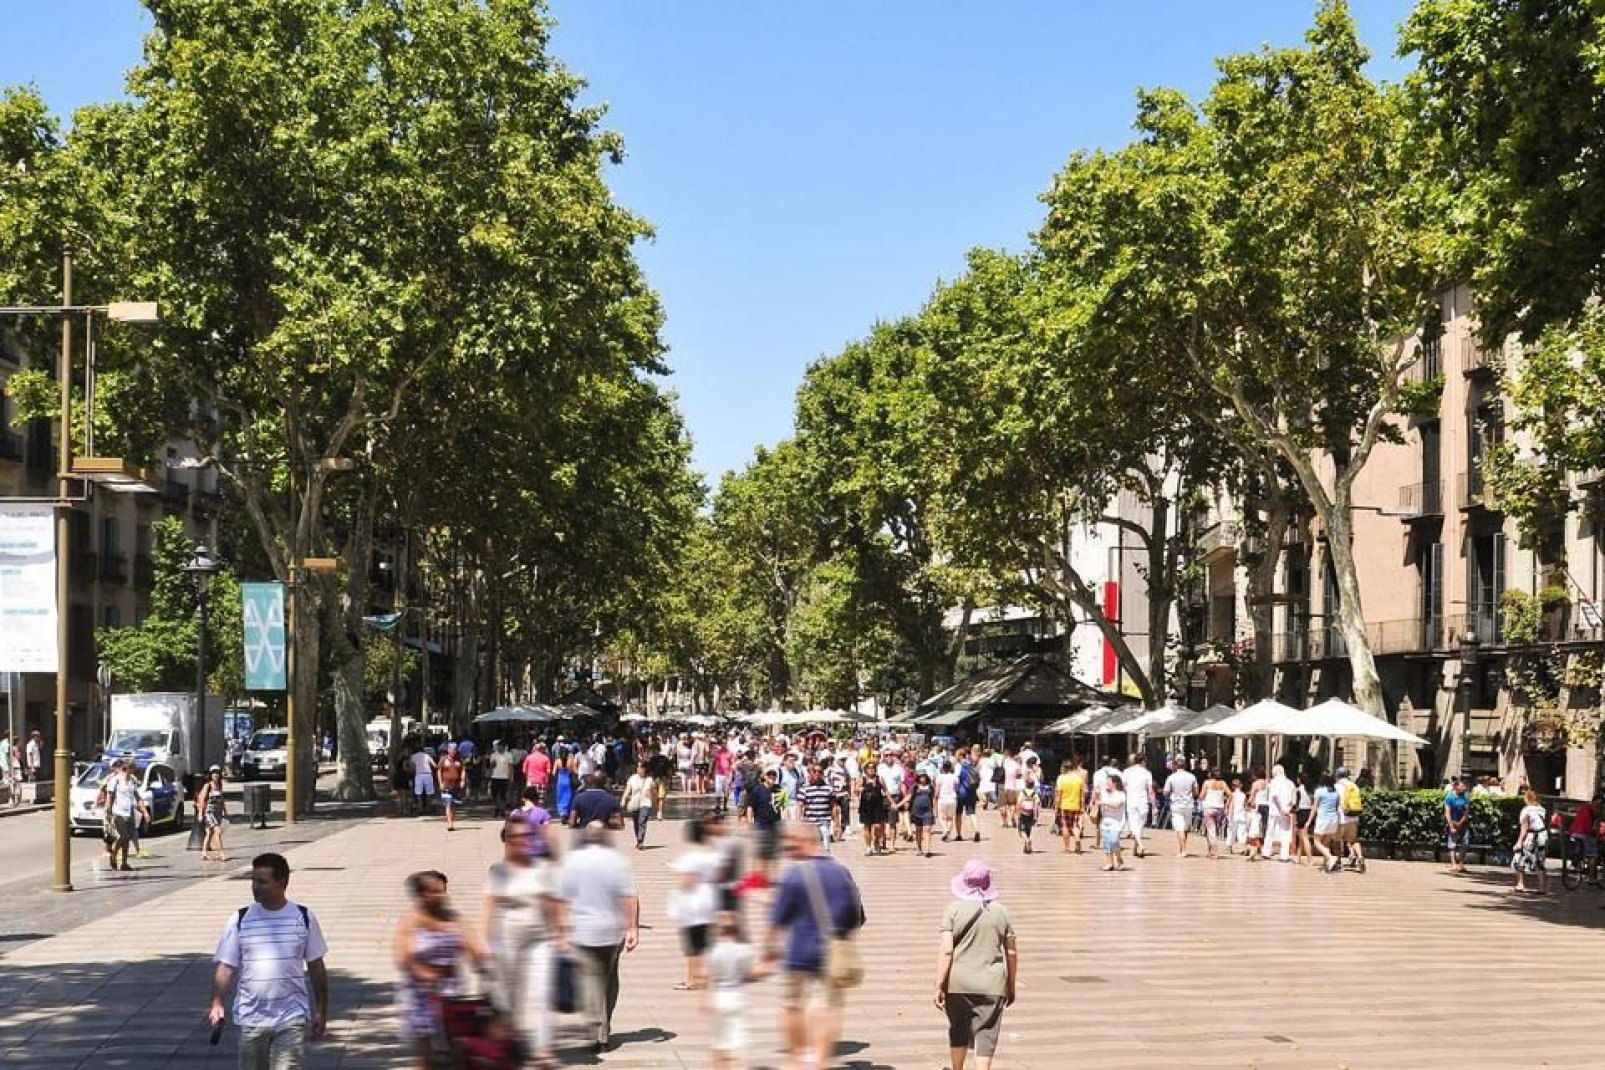 La Rambla, one of the most well-known avenues in Europe, makes it possible to reach the old port from Plaça de Catalunya.